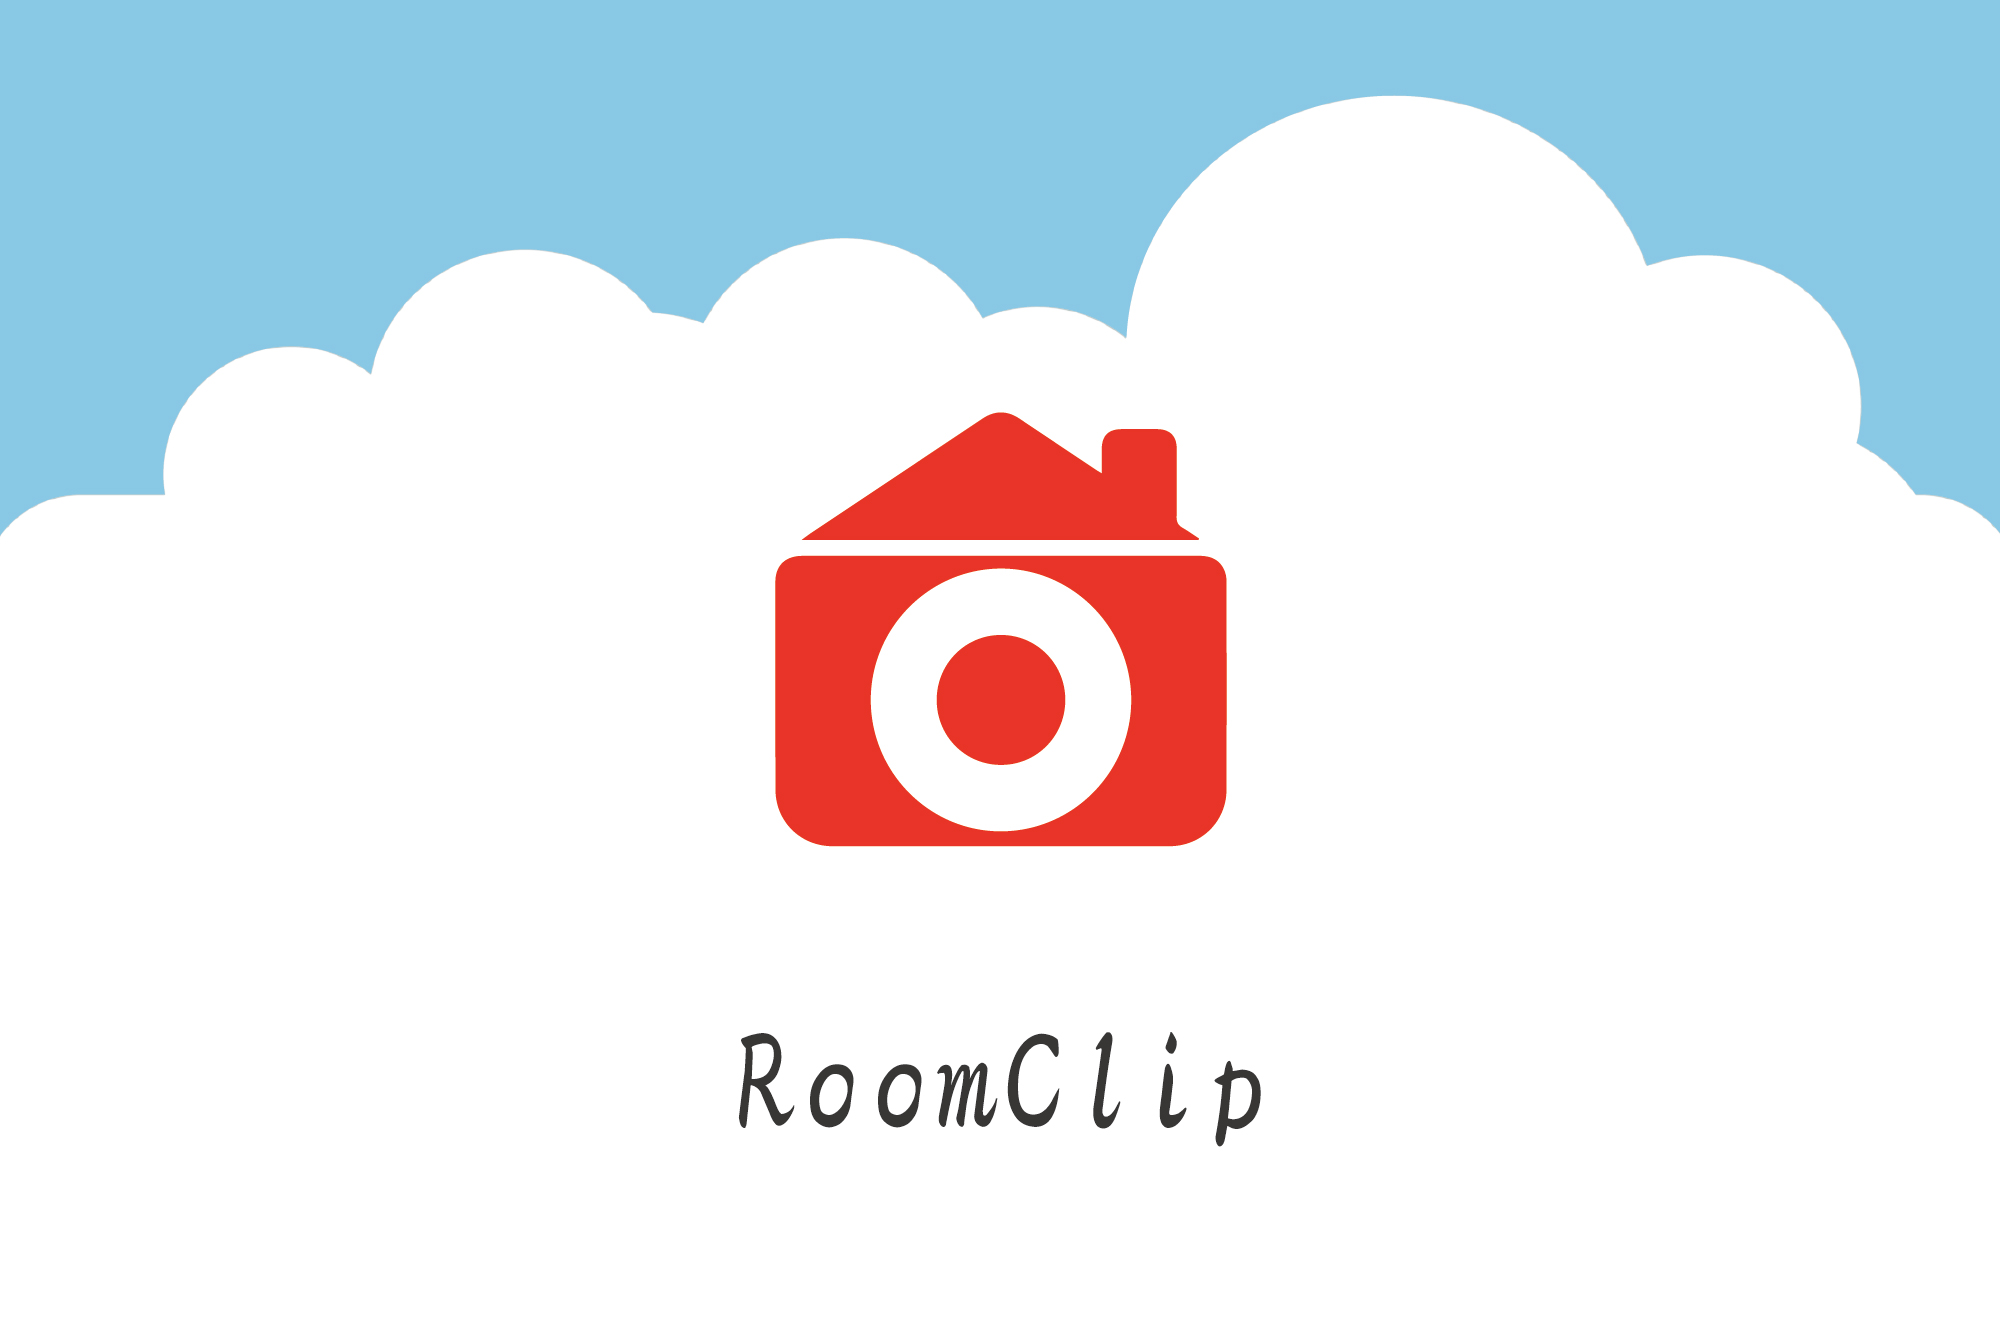 Roomclip